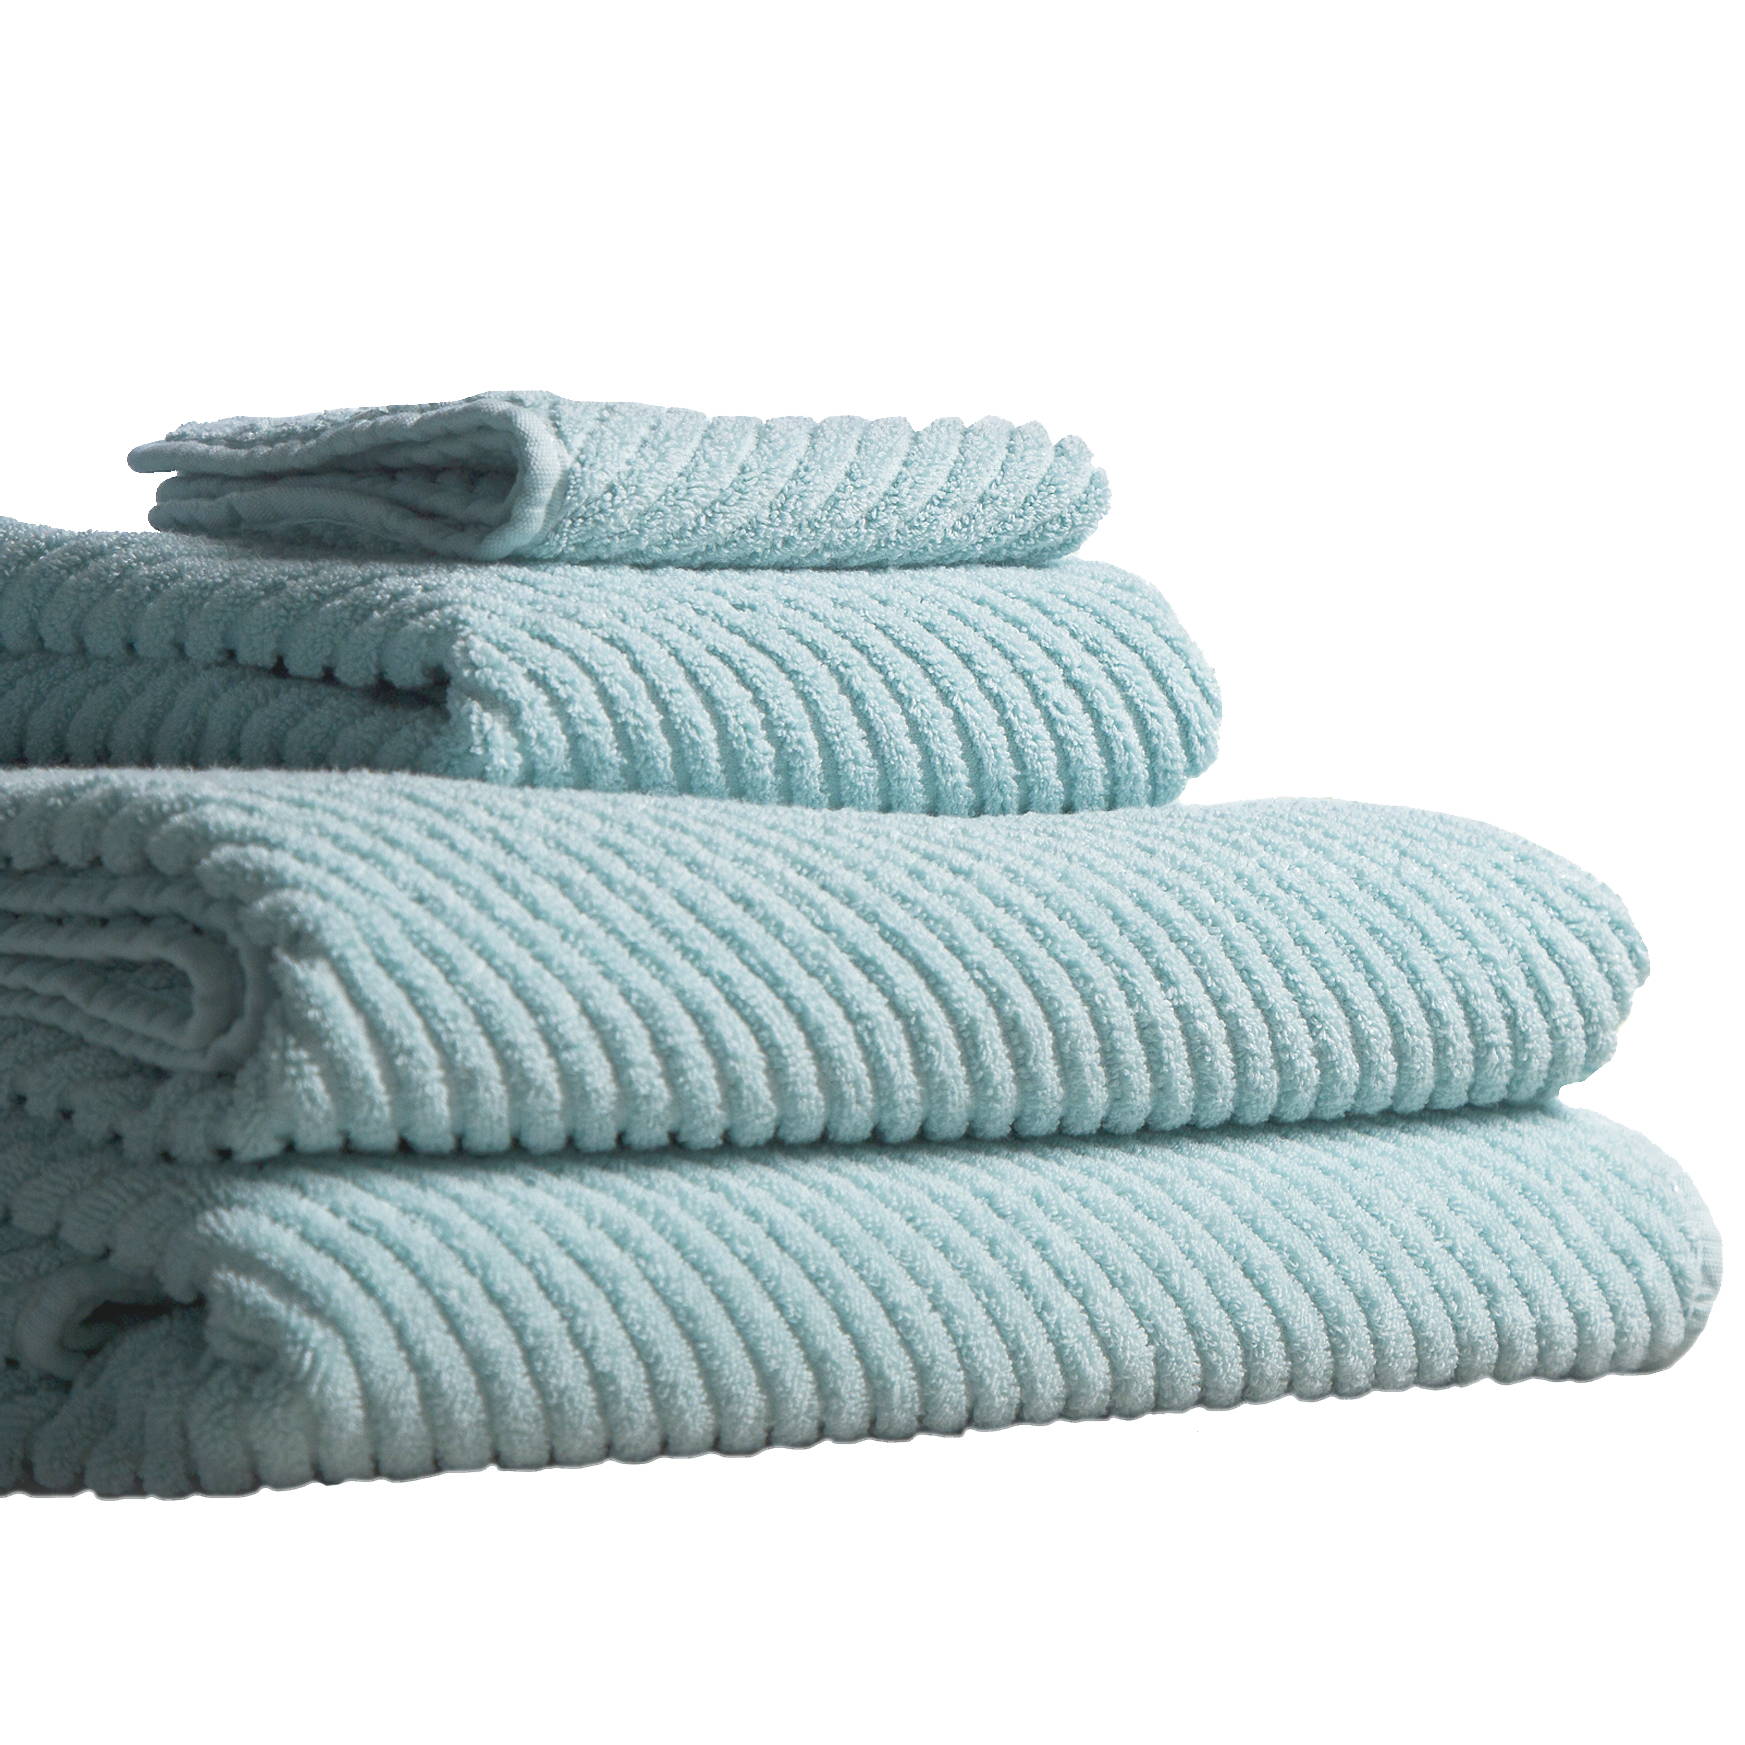 Abyss Luxury Towel Collections | Abyss Towels and Fine Linens